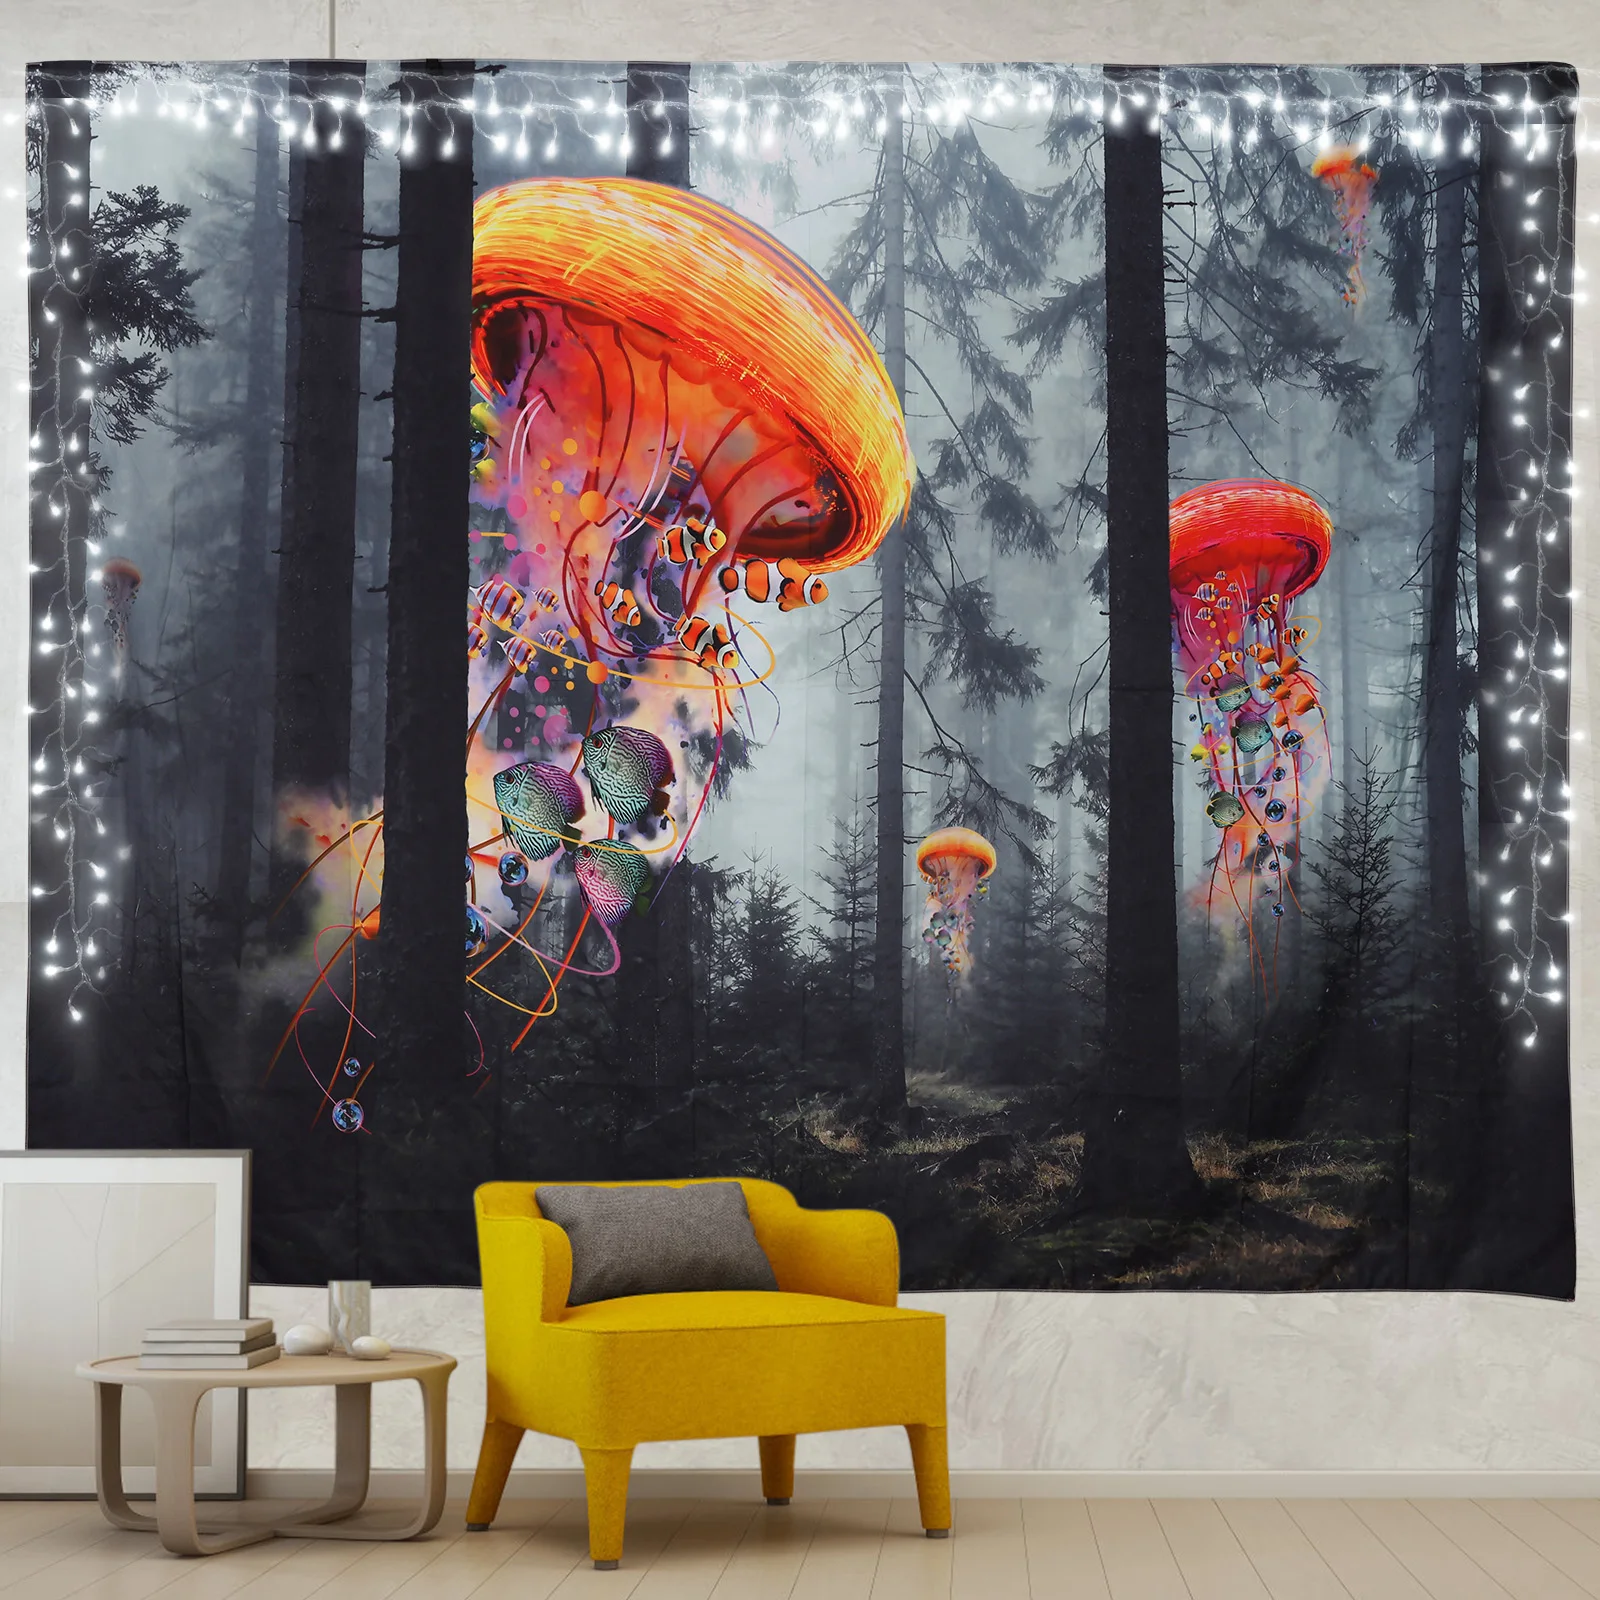 

Psychedelic Forest Colorful Jellyfish Tapestry Wall Hanging Fantasy Plant Wall Tapestry Hippie Wall Carpets for Home Decor Dorm